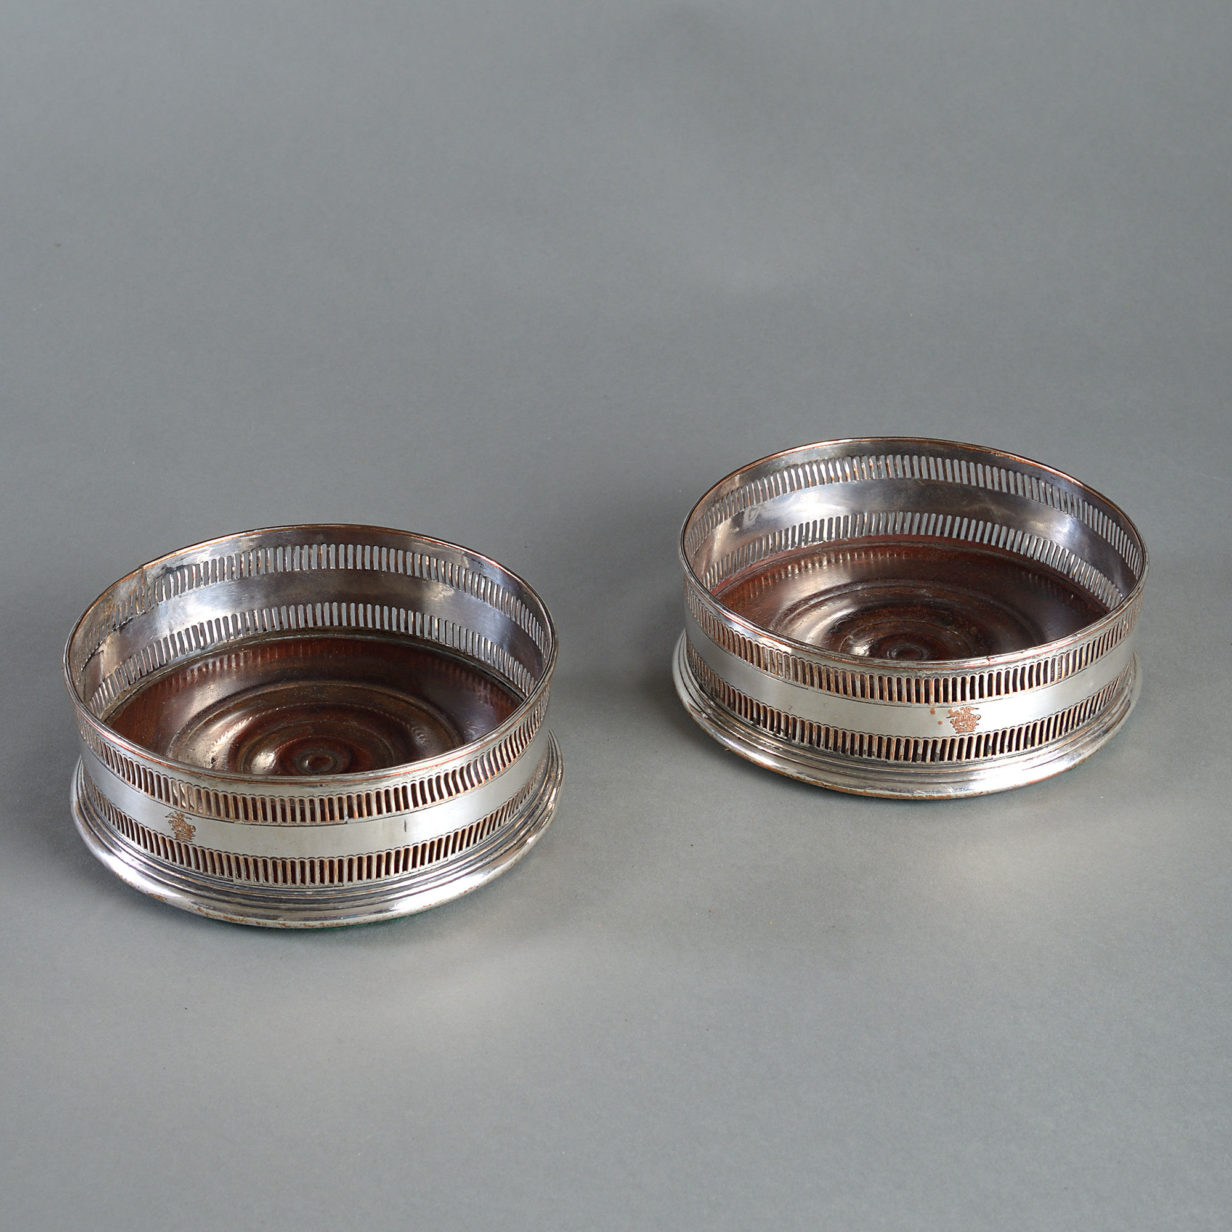 Early 19th century pair of sheffield plated wine coasters